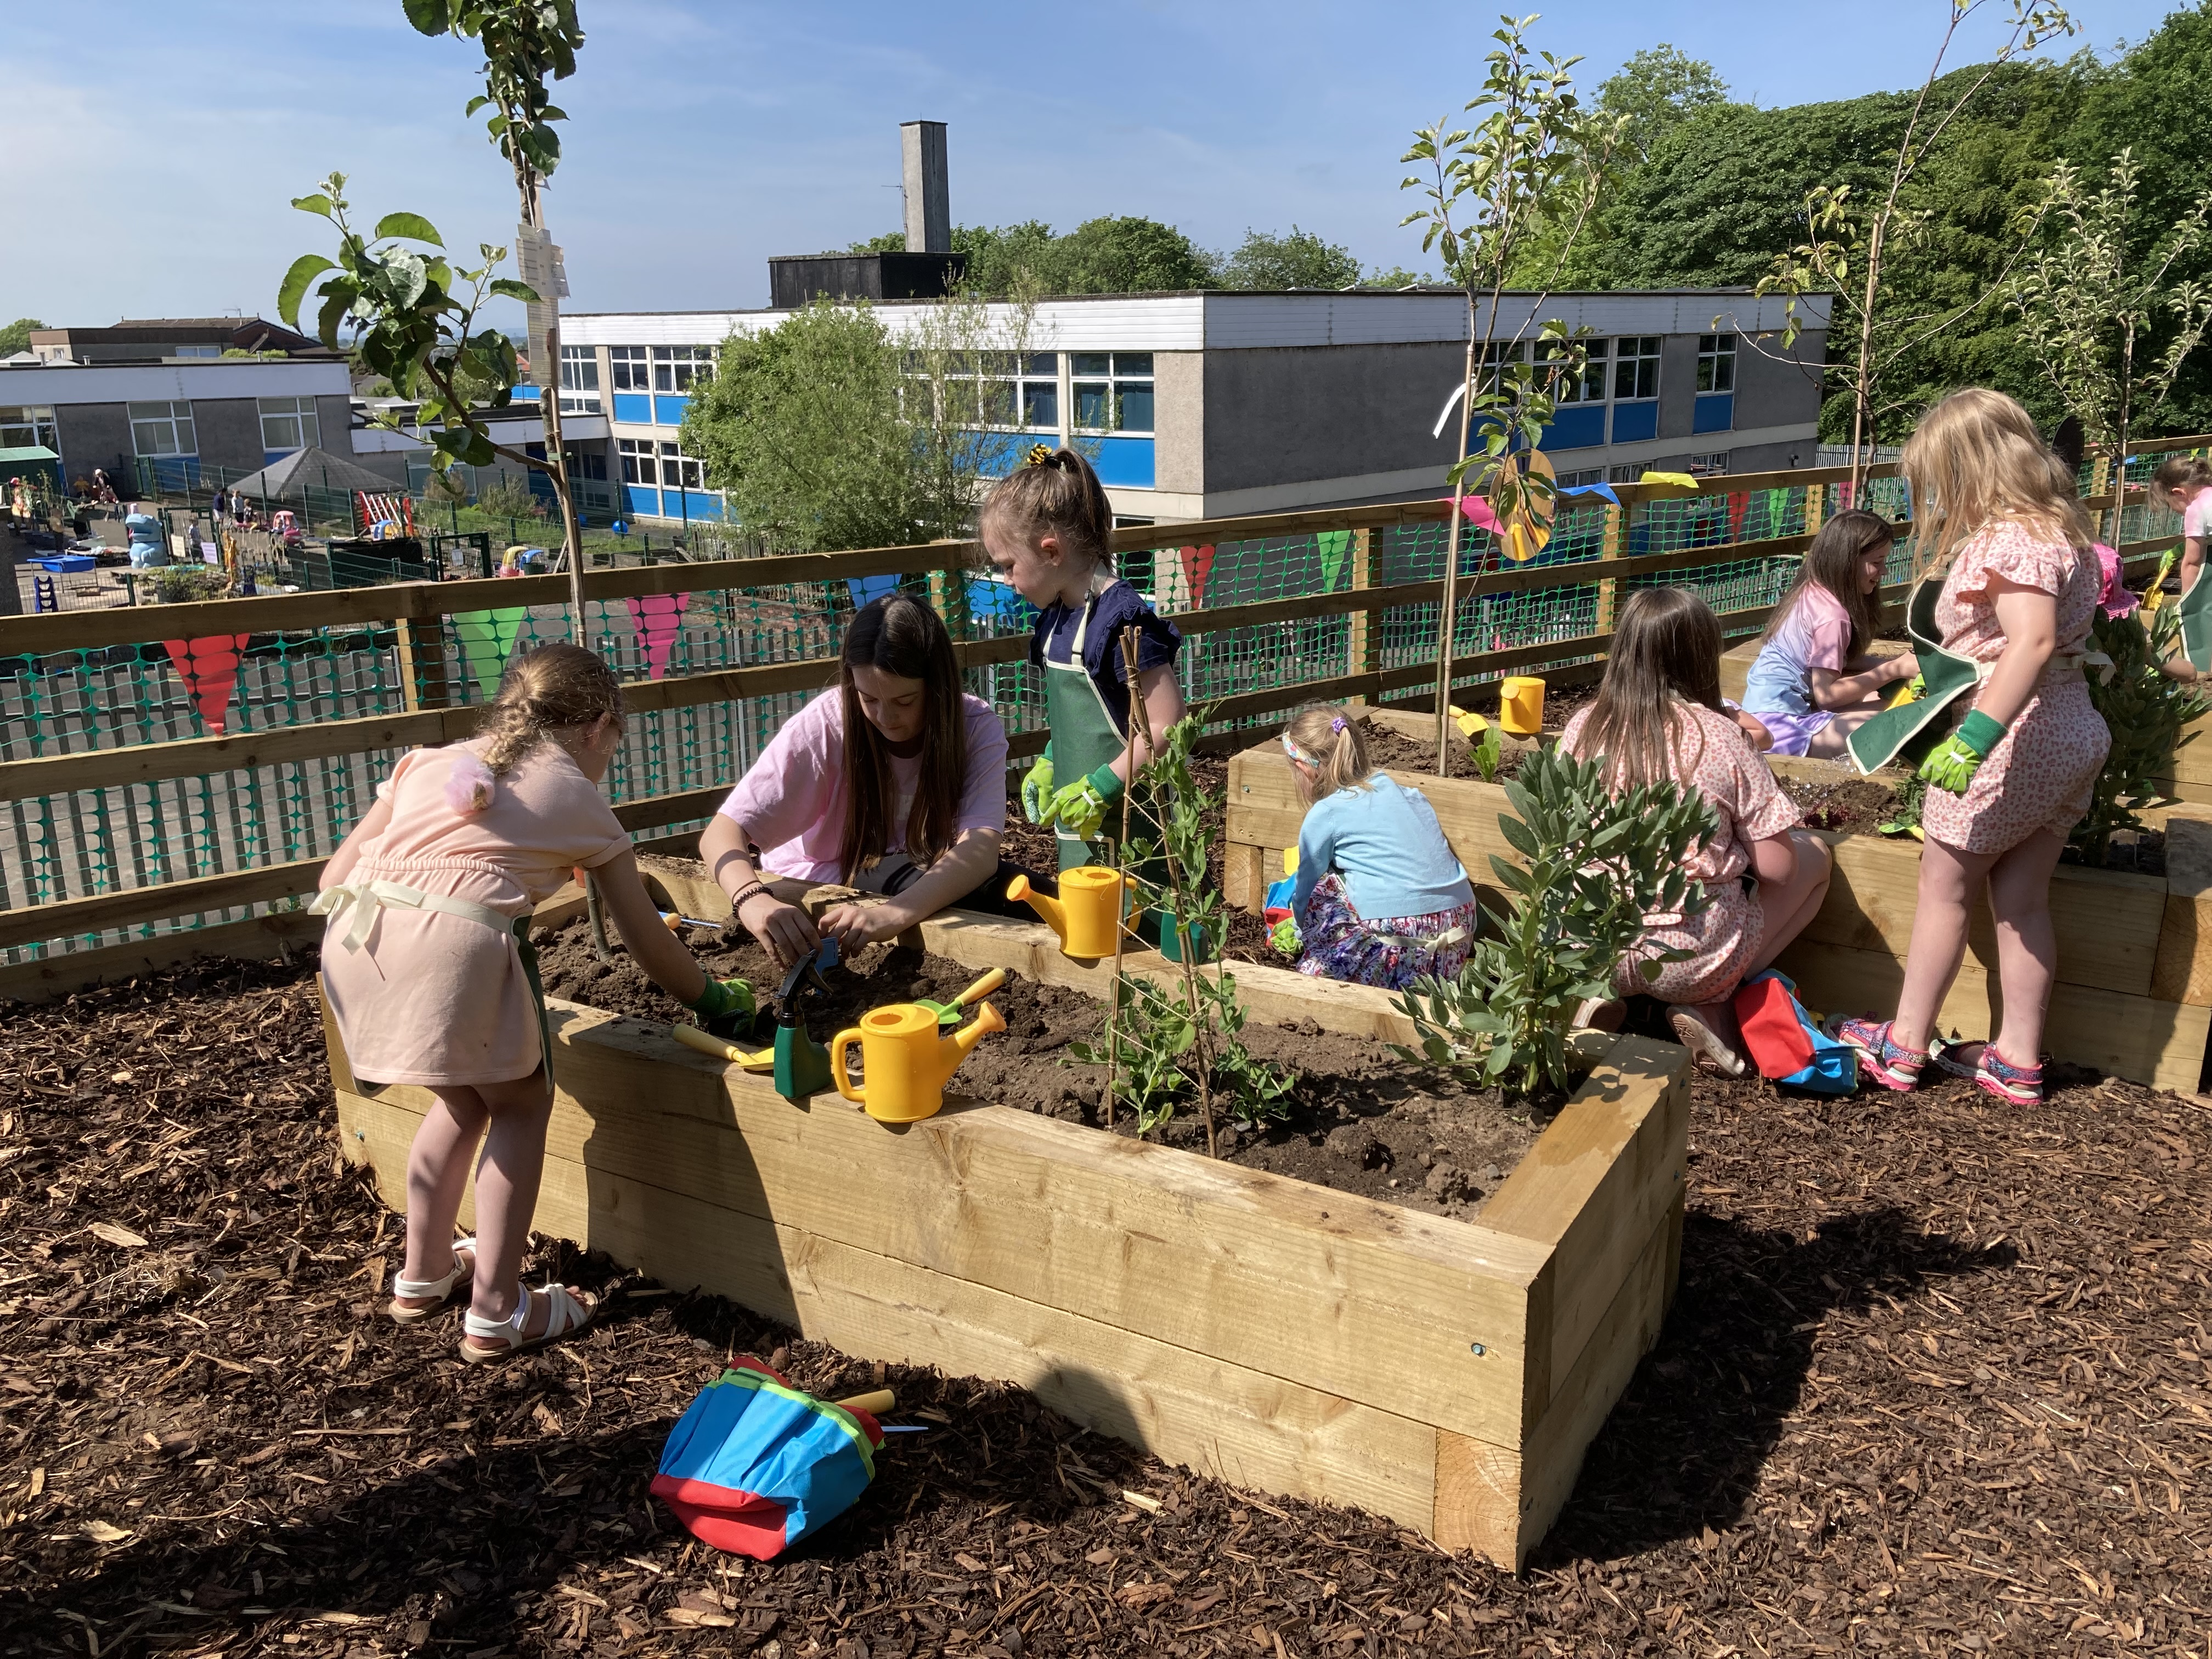 A photograph of children playing in the outdoor classroom, overlooking a school playground